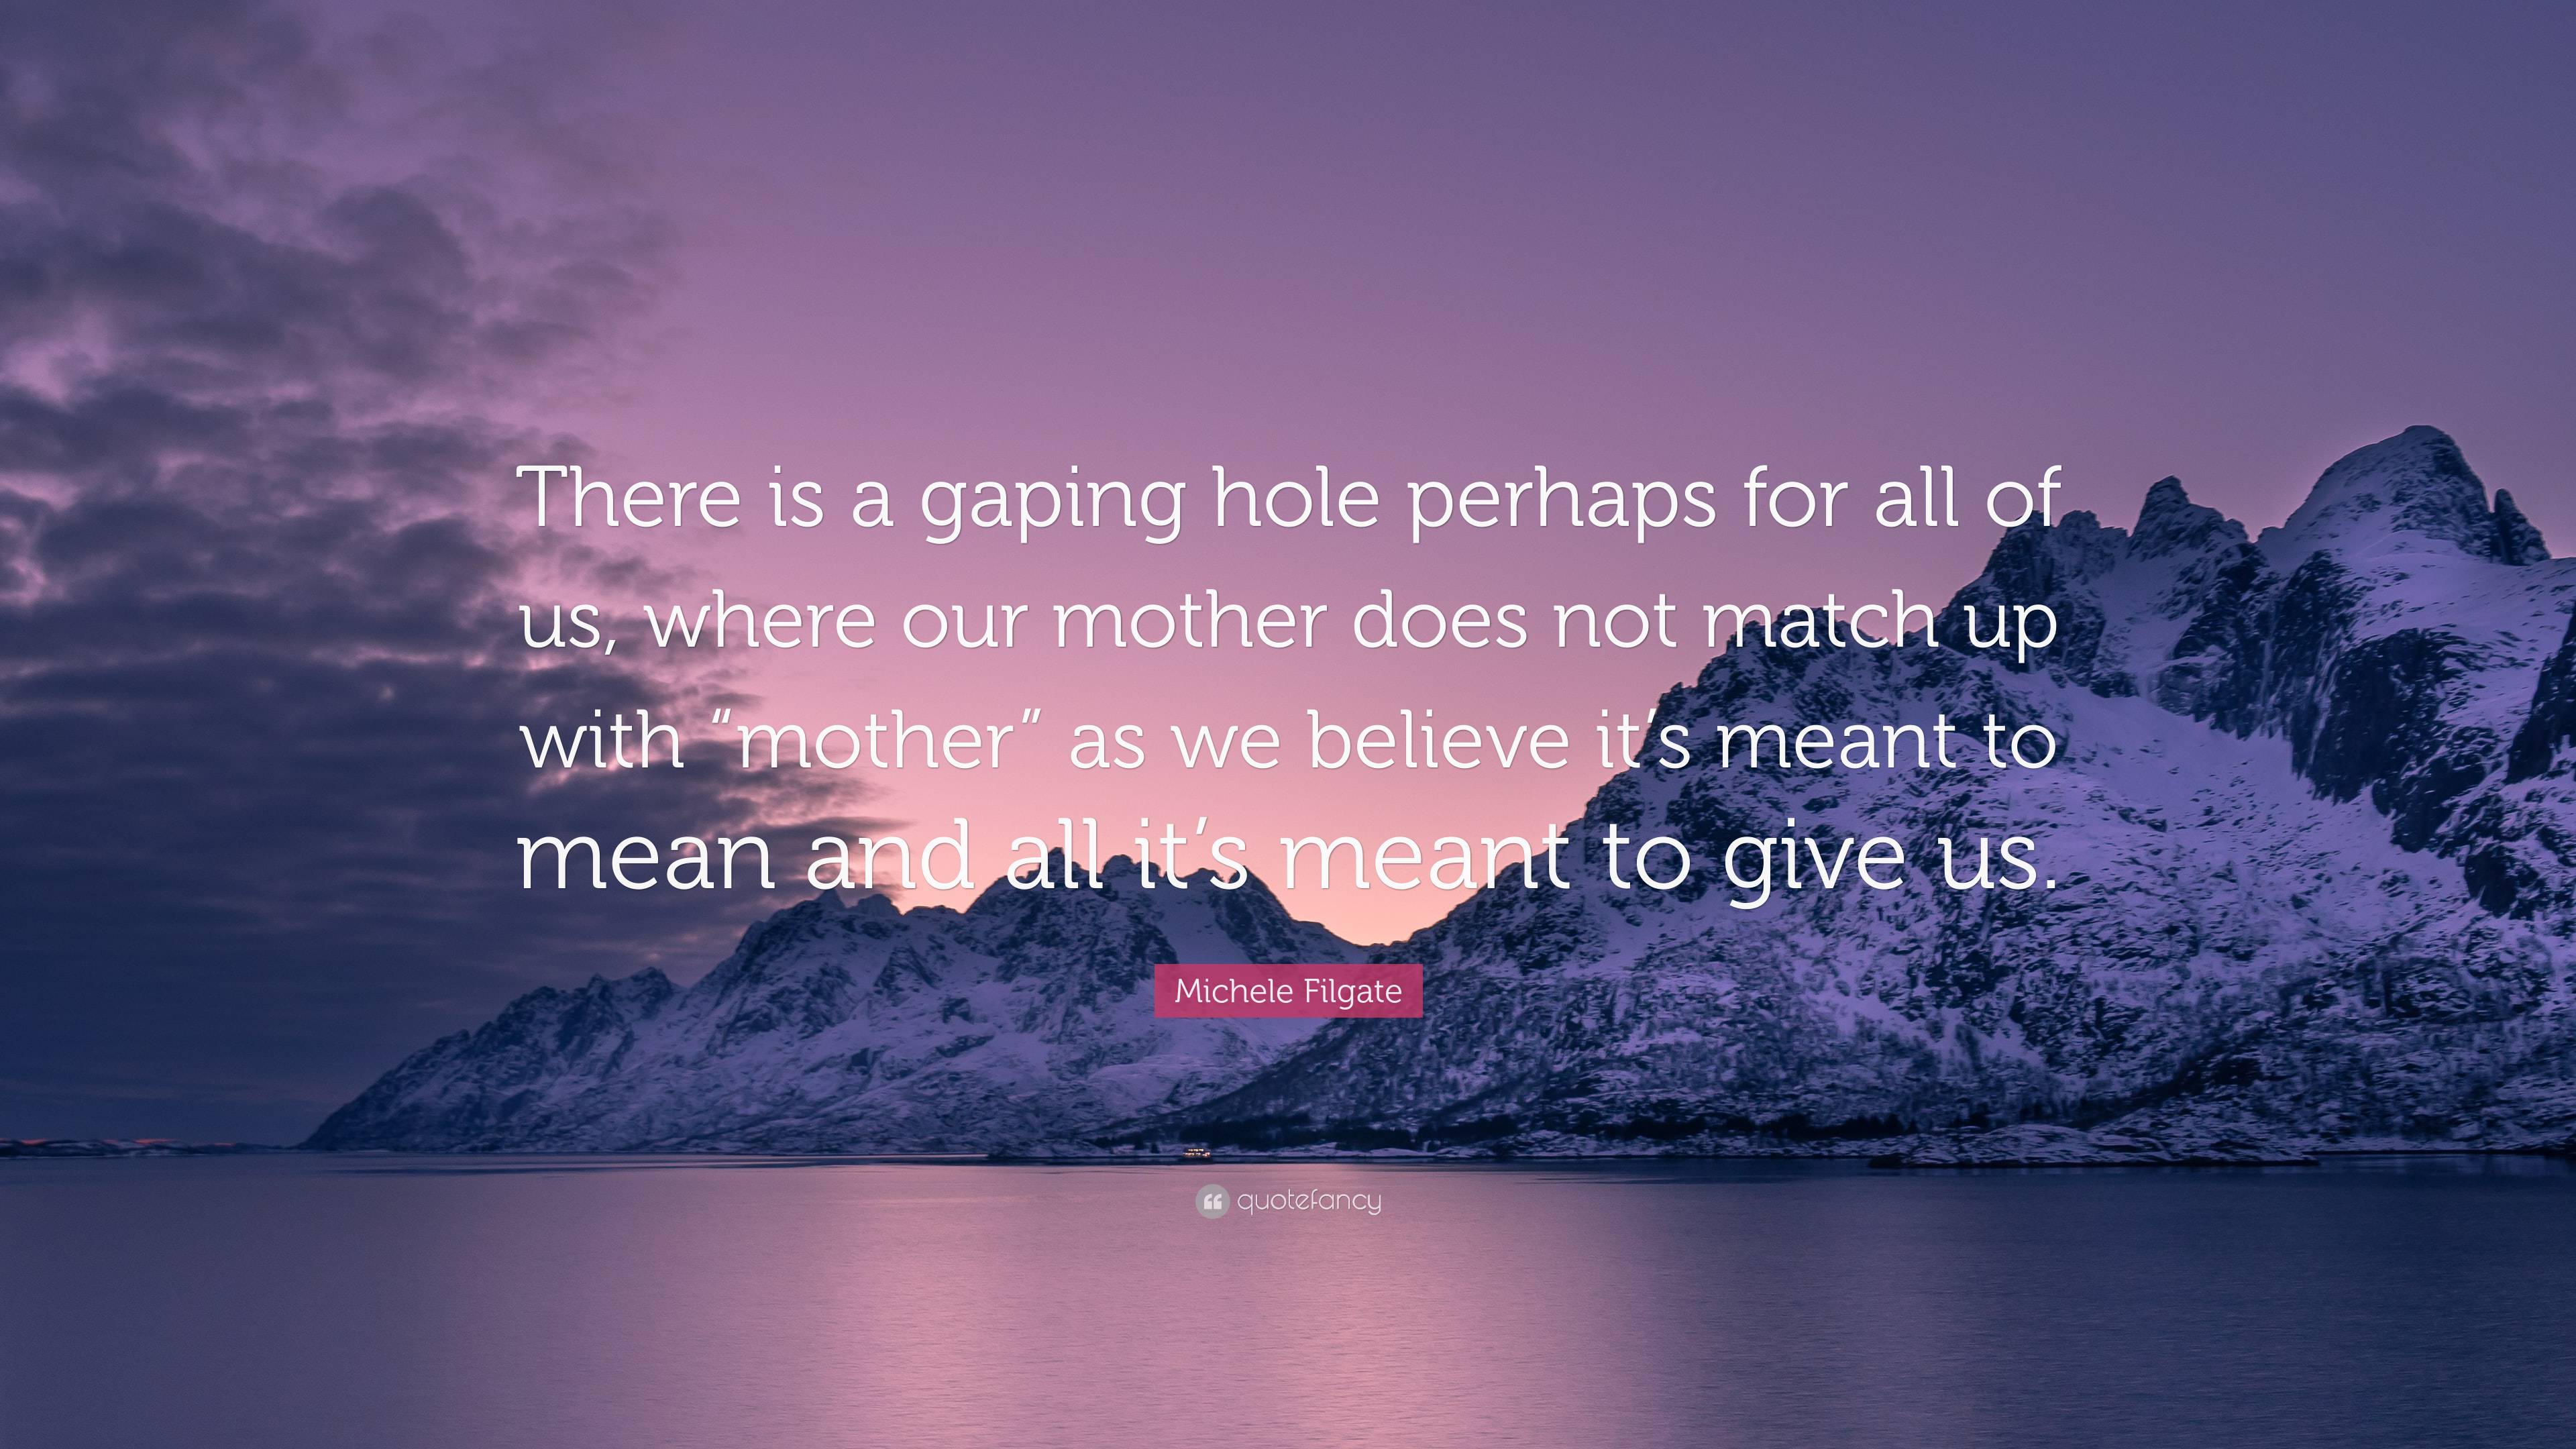 https://quotefancy.com/media/wallpaper/3840x2160/7308403-Michele-Filgate-Quote-There-is-a-gaping-hole-perhaps-for-all-of-us.jpg